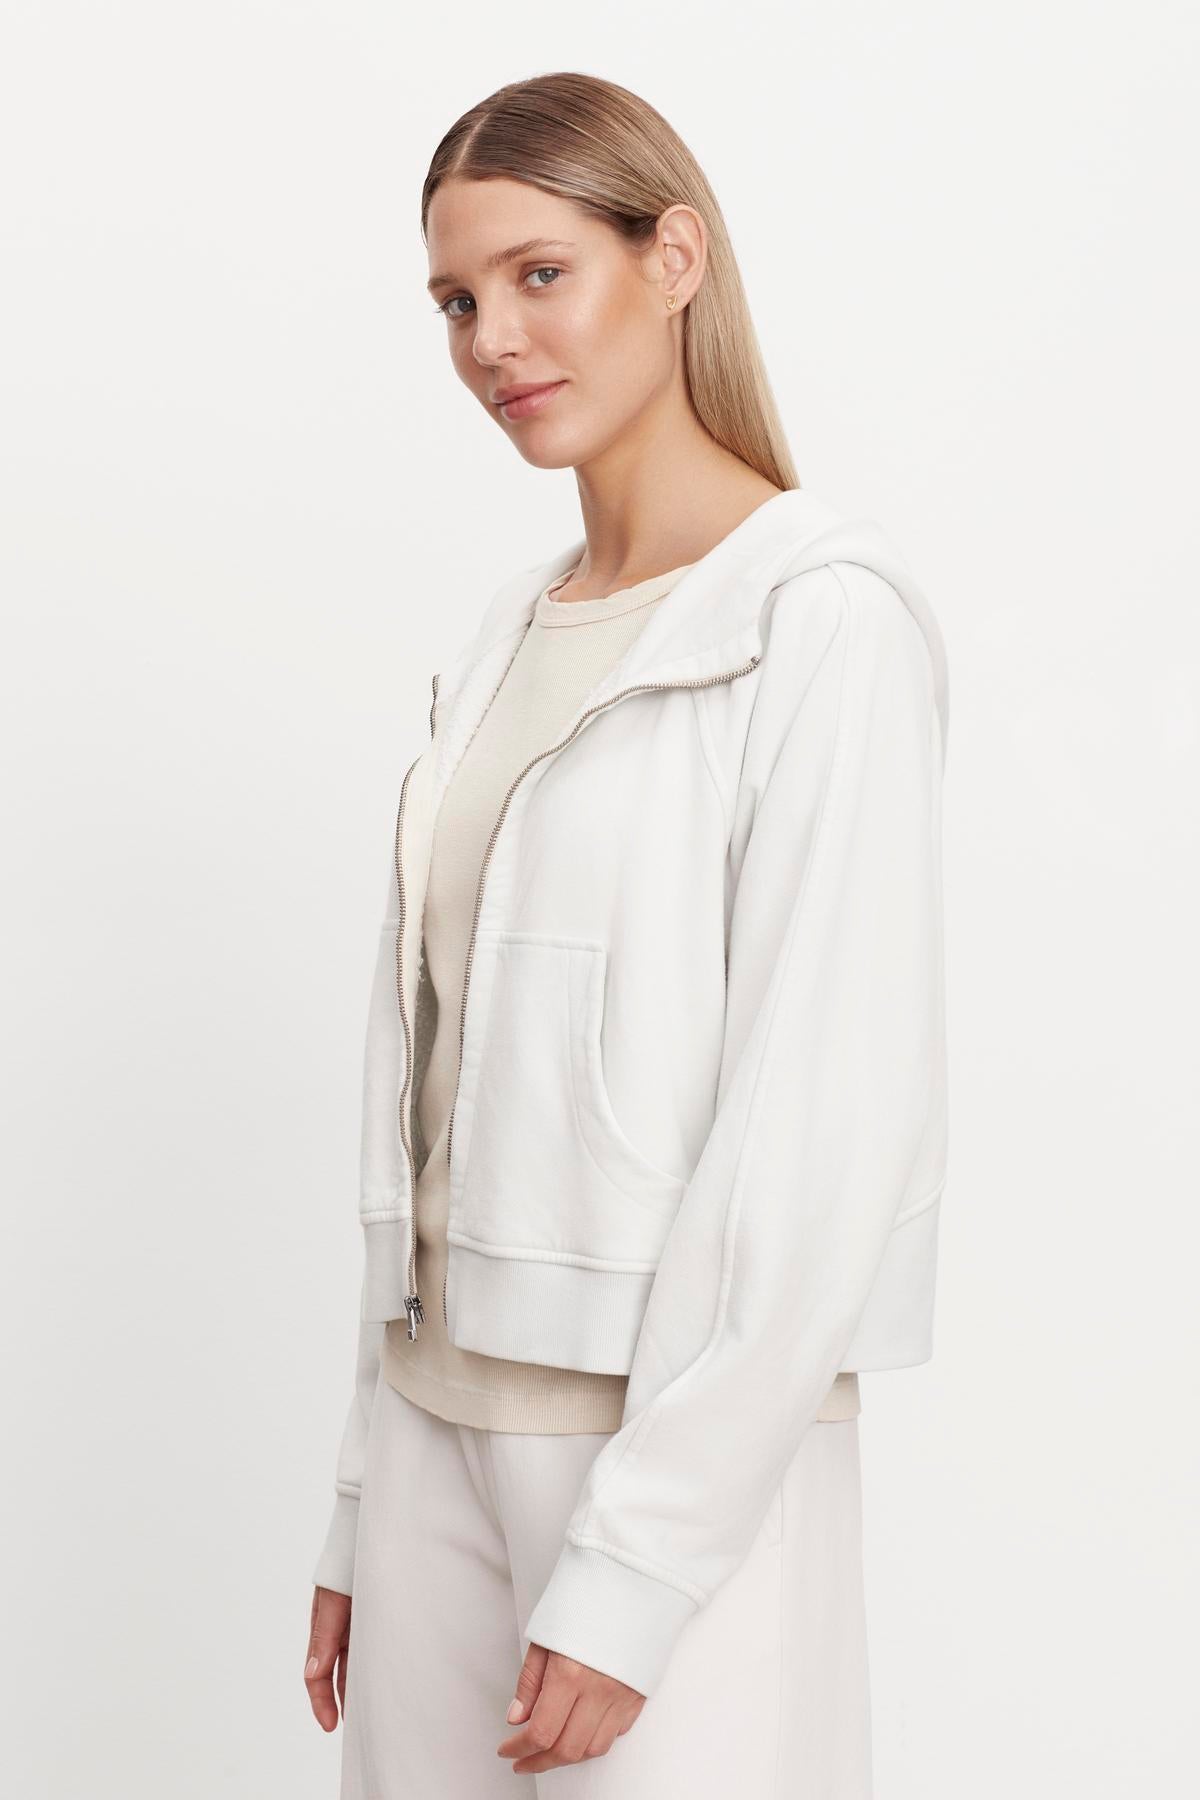 The model is wearing a white TORY SOFT FLEECE HOODIE jacket and pants. (Brand name: Velvet by Graham & Spencer)-35696175317185